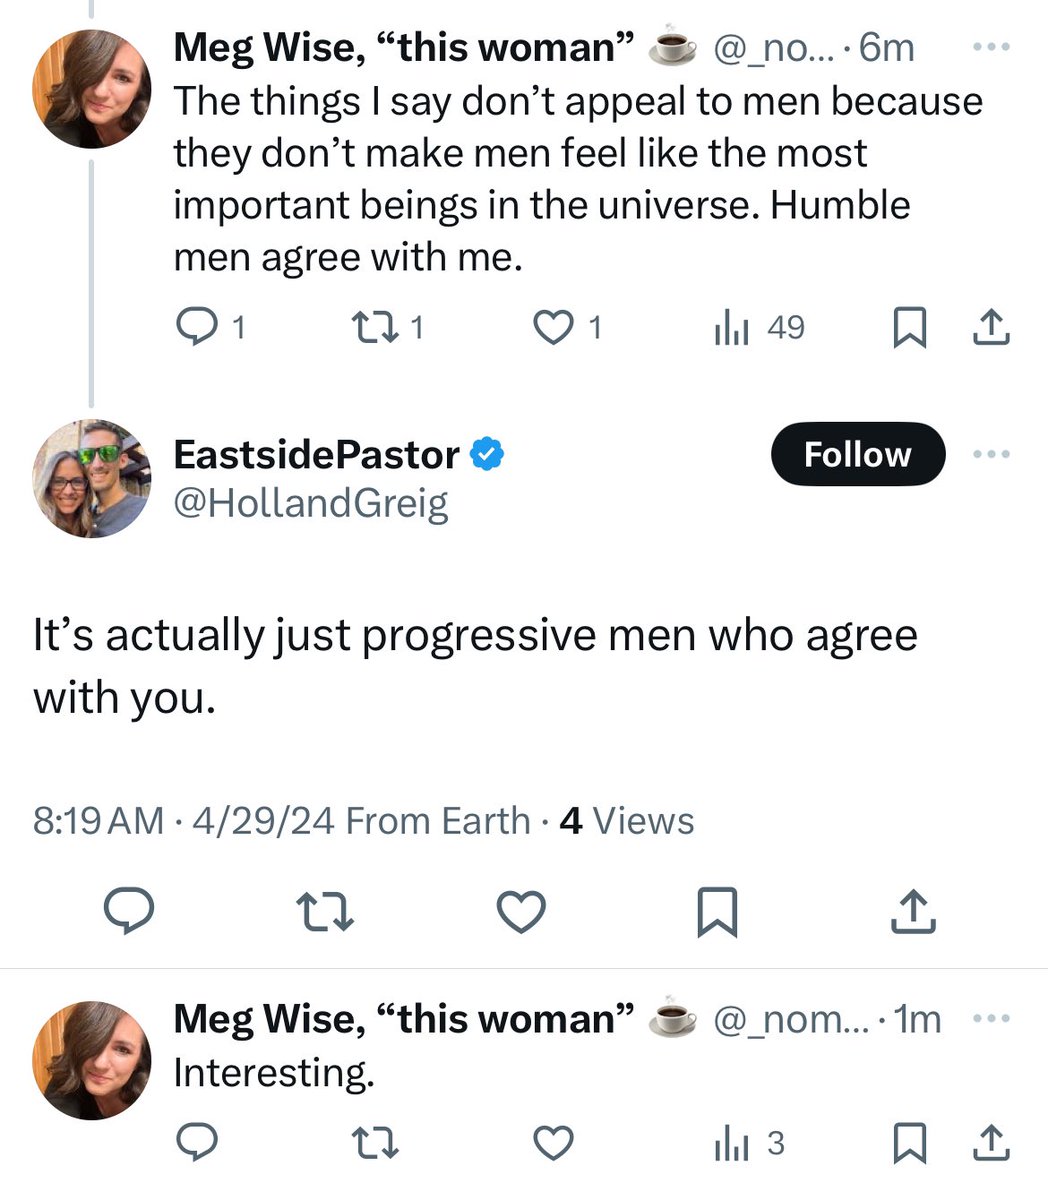 I see the progressive men and the personal work they’re doing. Do you?